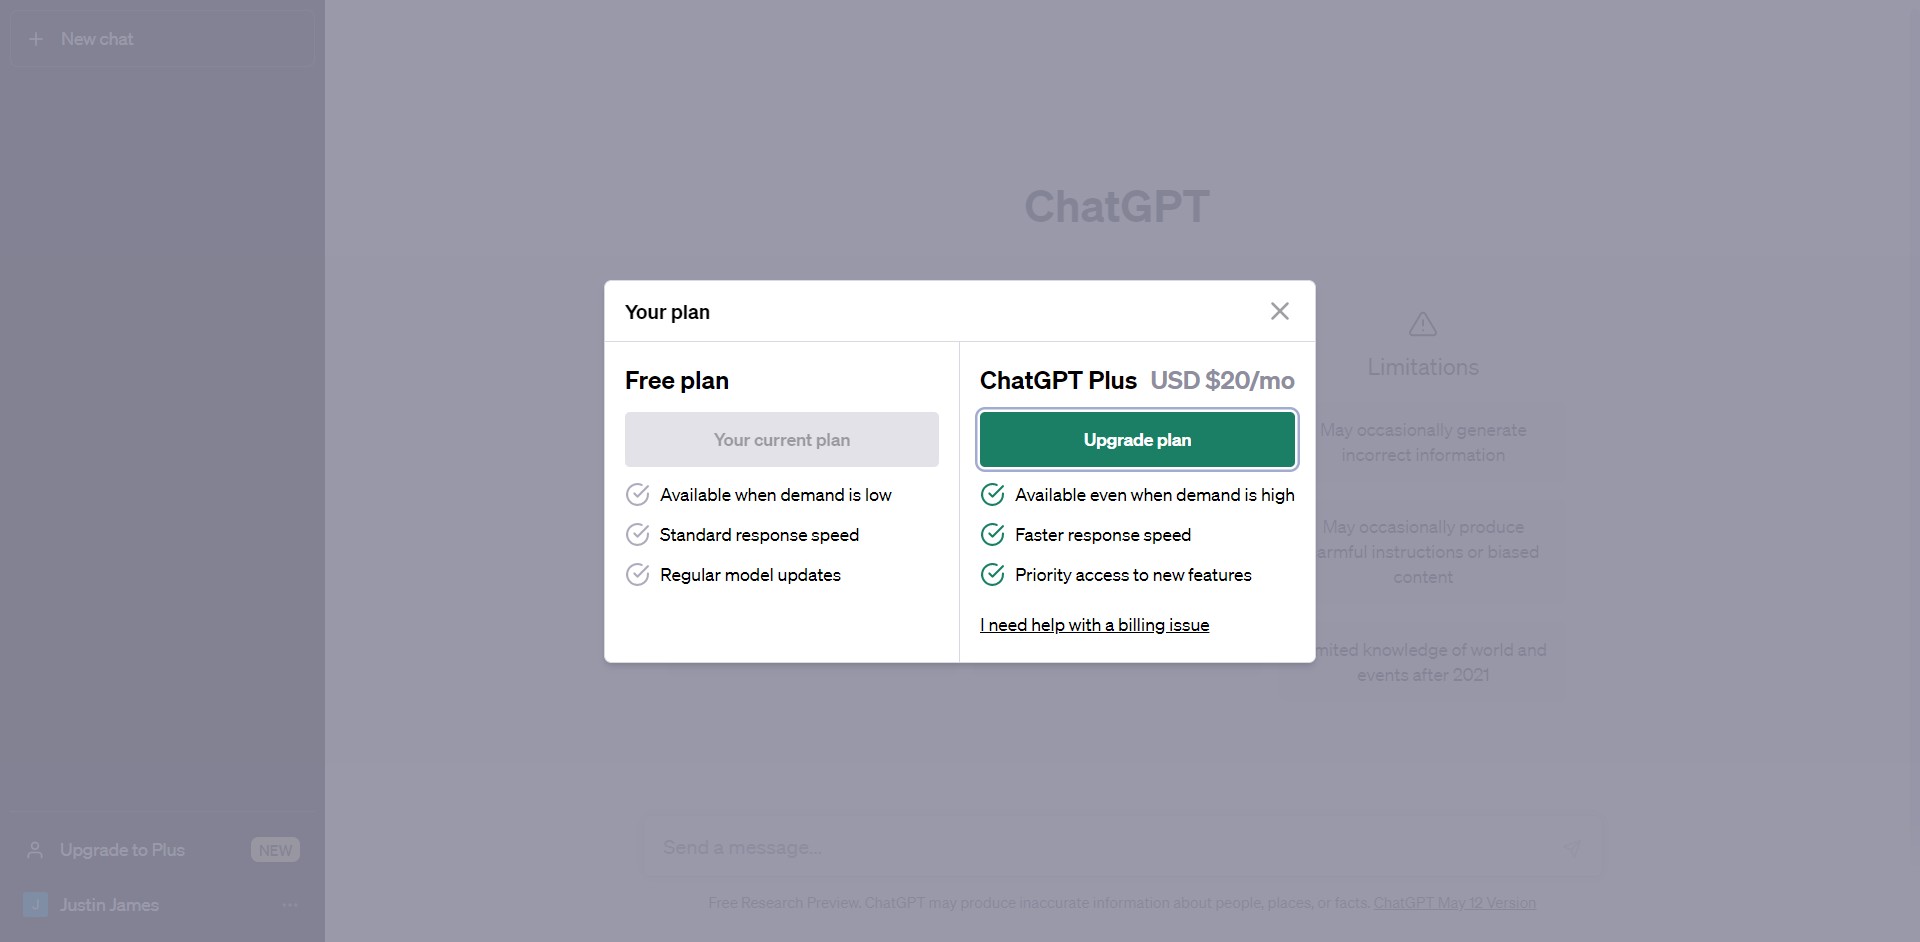 How to upgrade to ChatGPT Plus